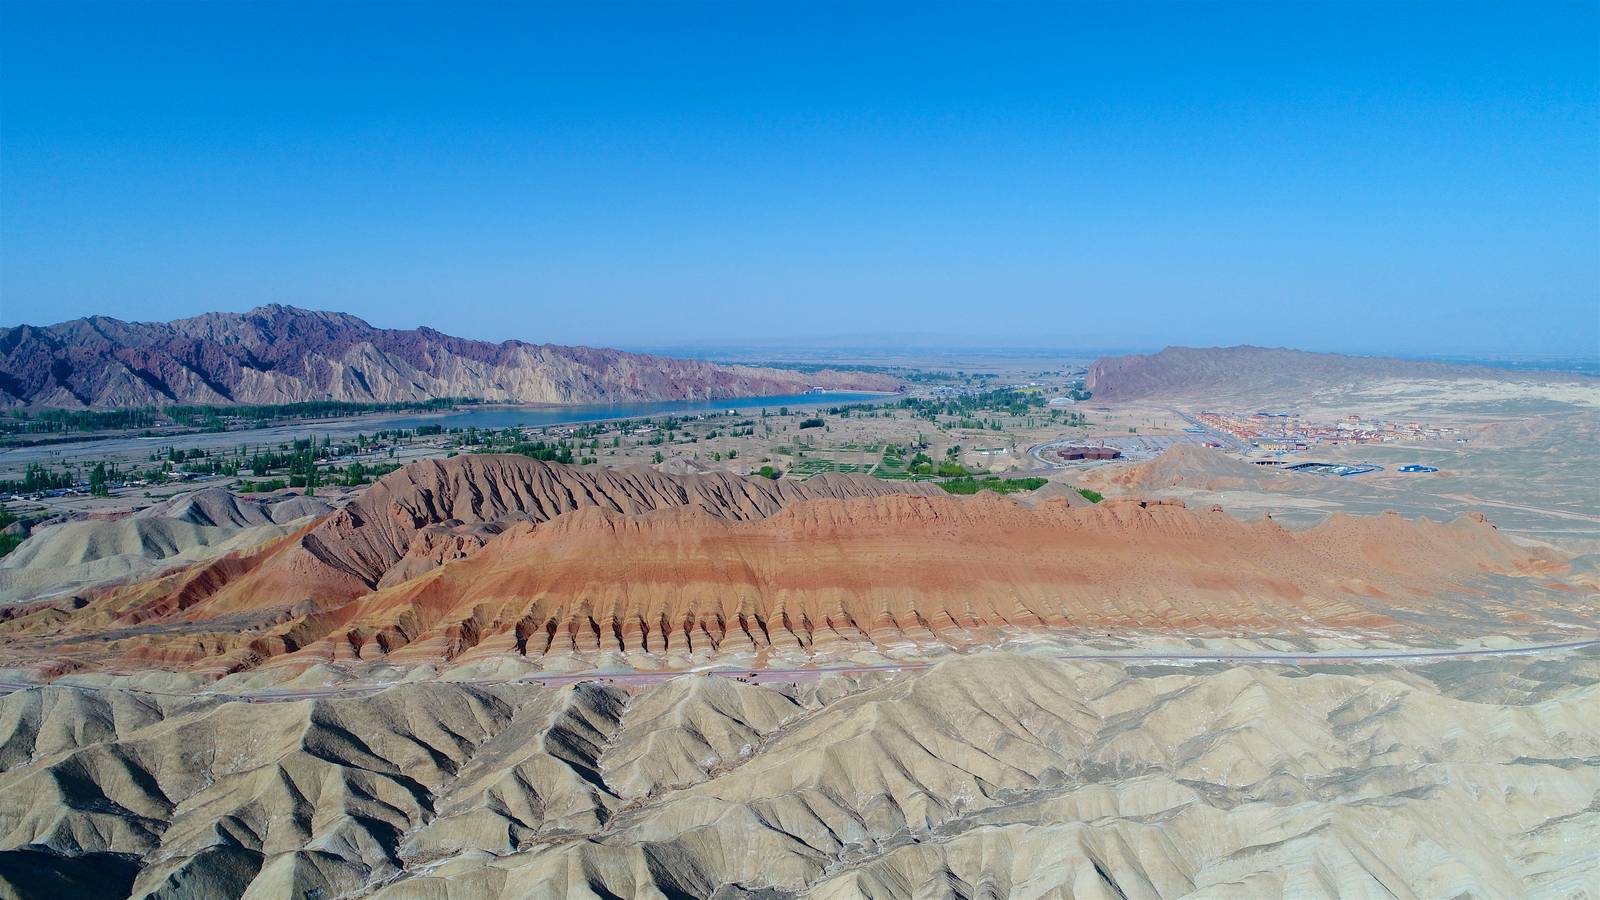 Aerial view of colorful rainbow mountains, Zhangye National Geopark, China by Bonandbon